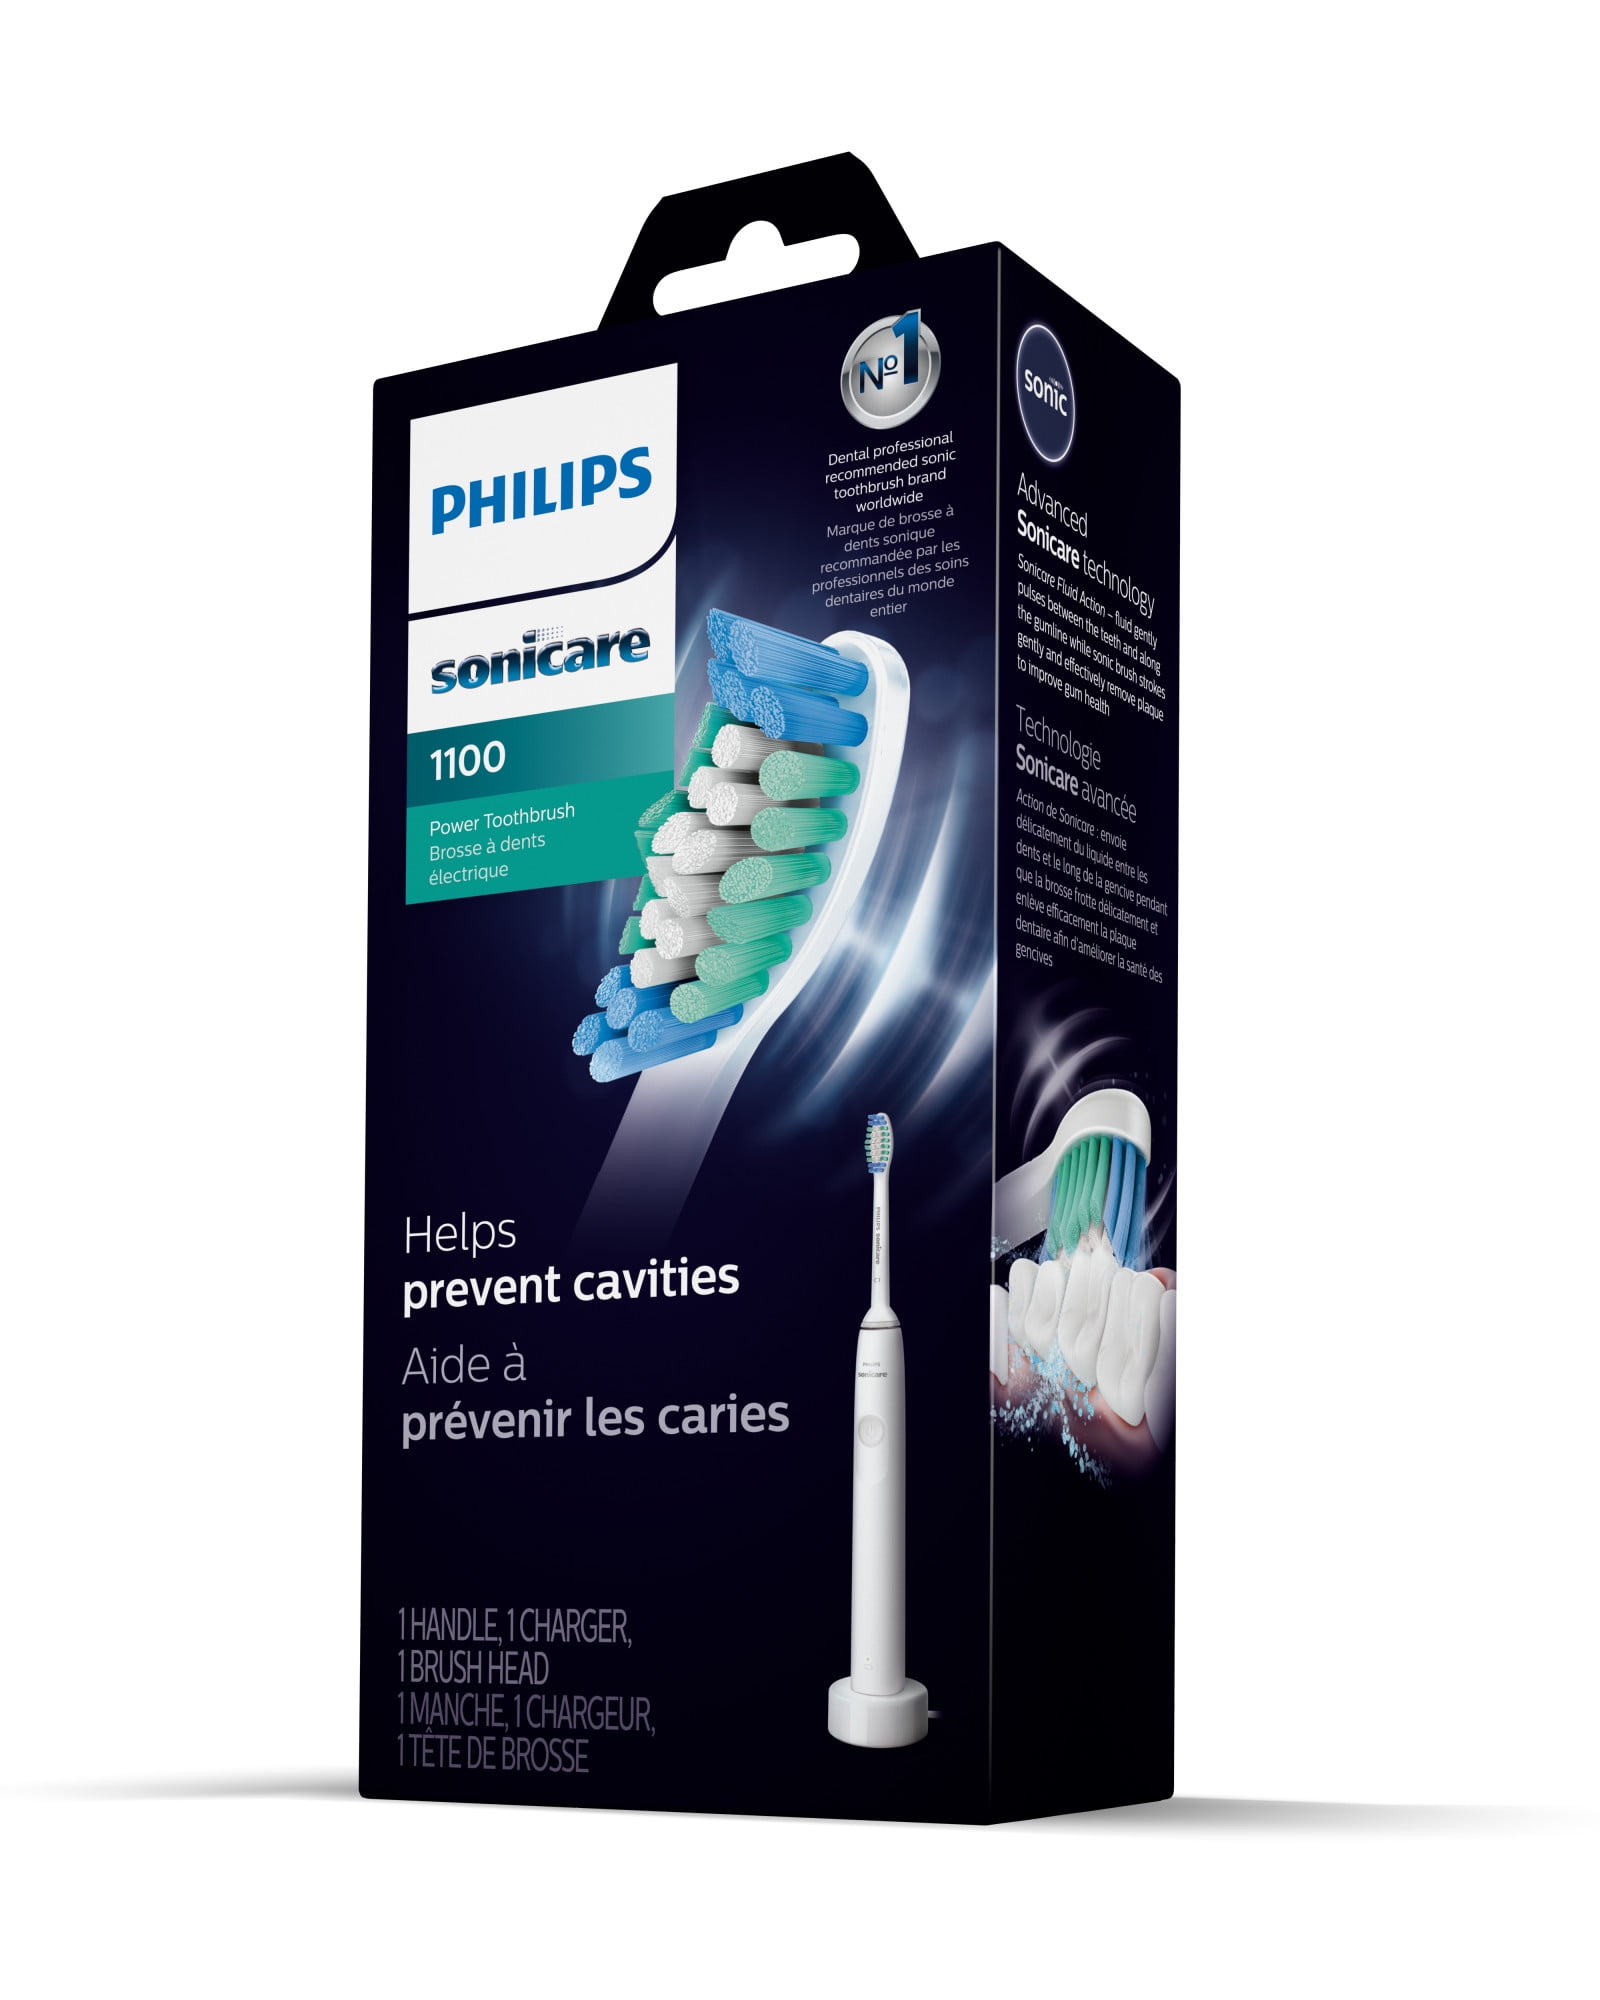 Grey White Sonicare Electric Toothbrush, Power Rechargeable HX3641/02 1100 Philips Toothbrush,